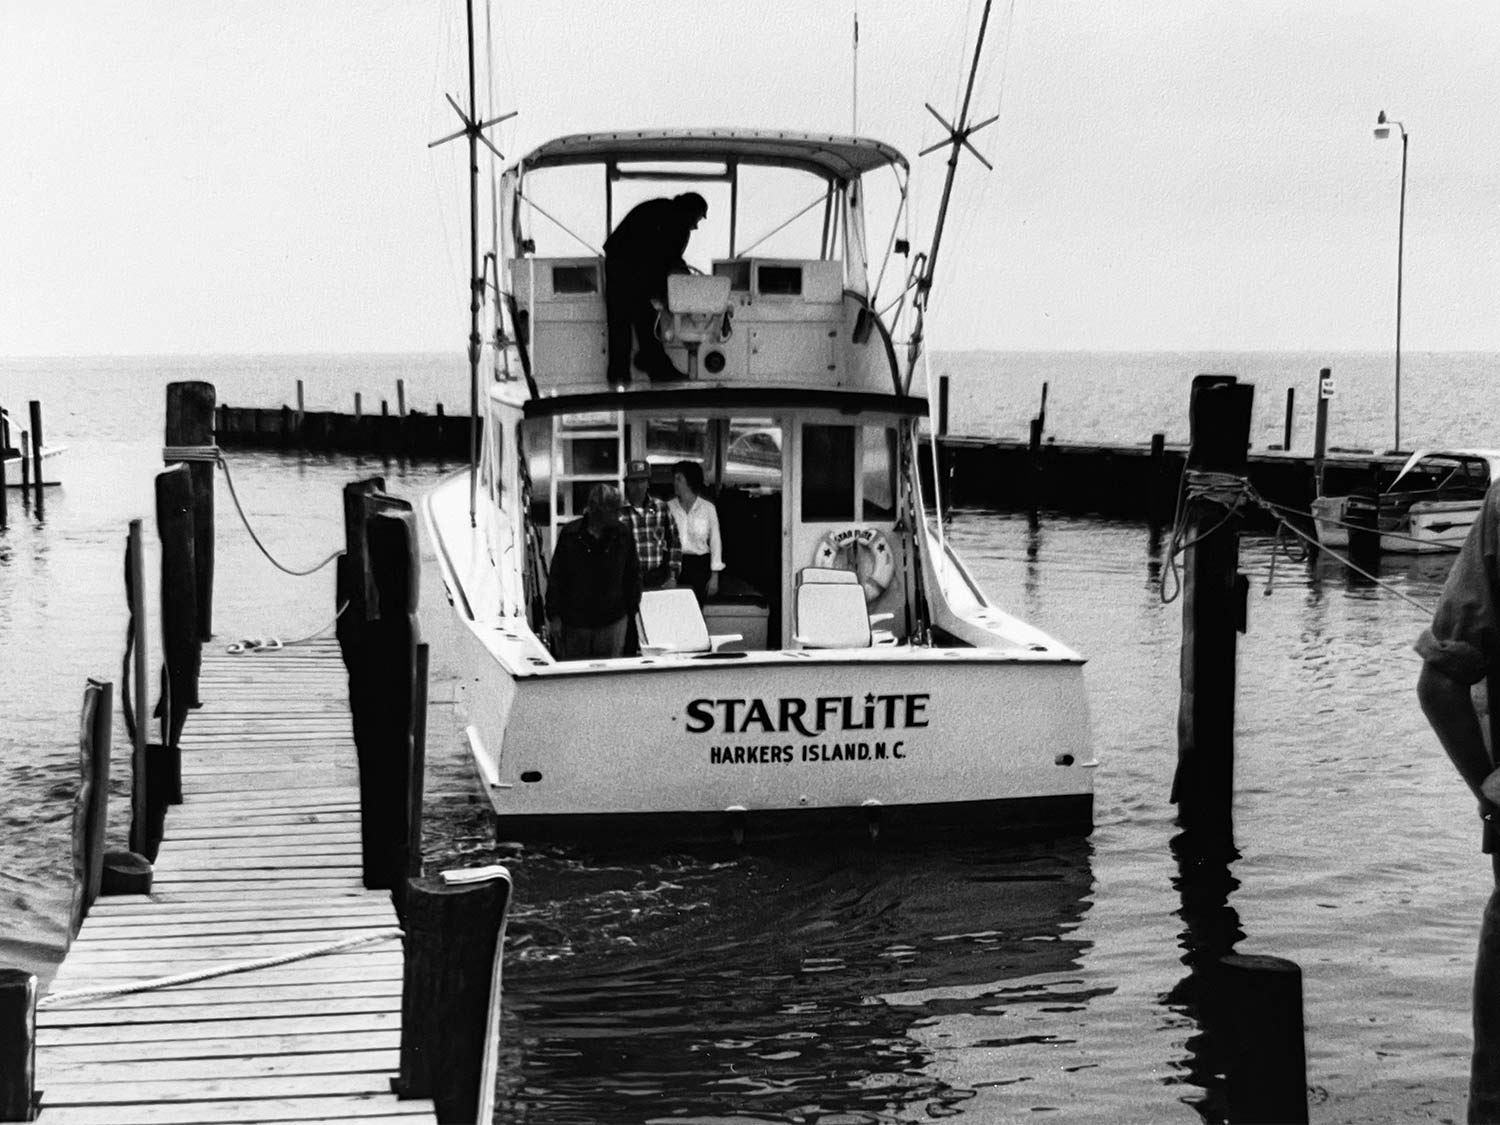 Black and white image of a small boat docked in a marina.